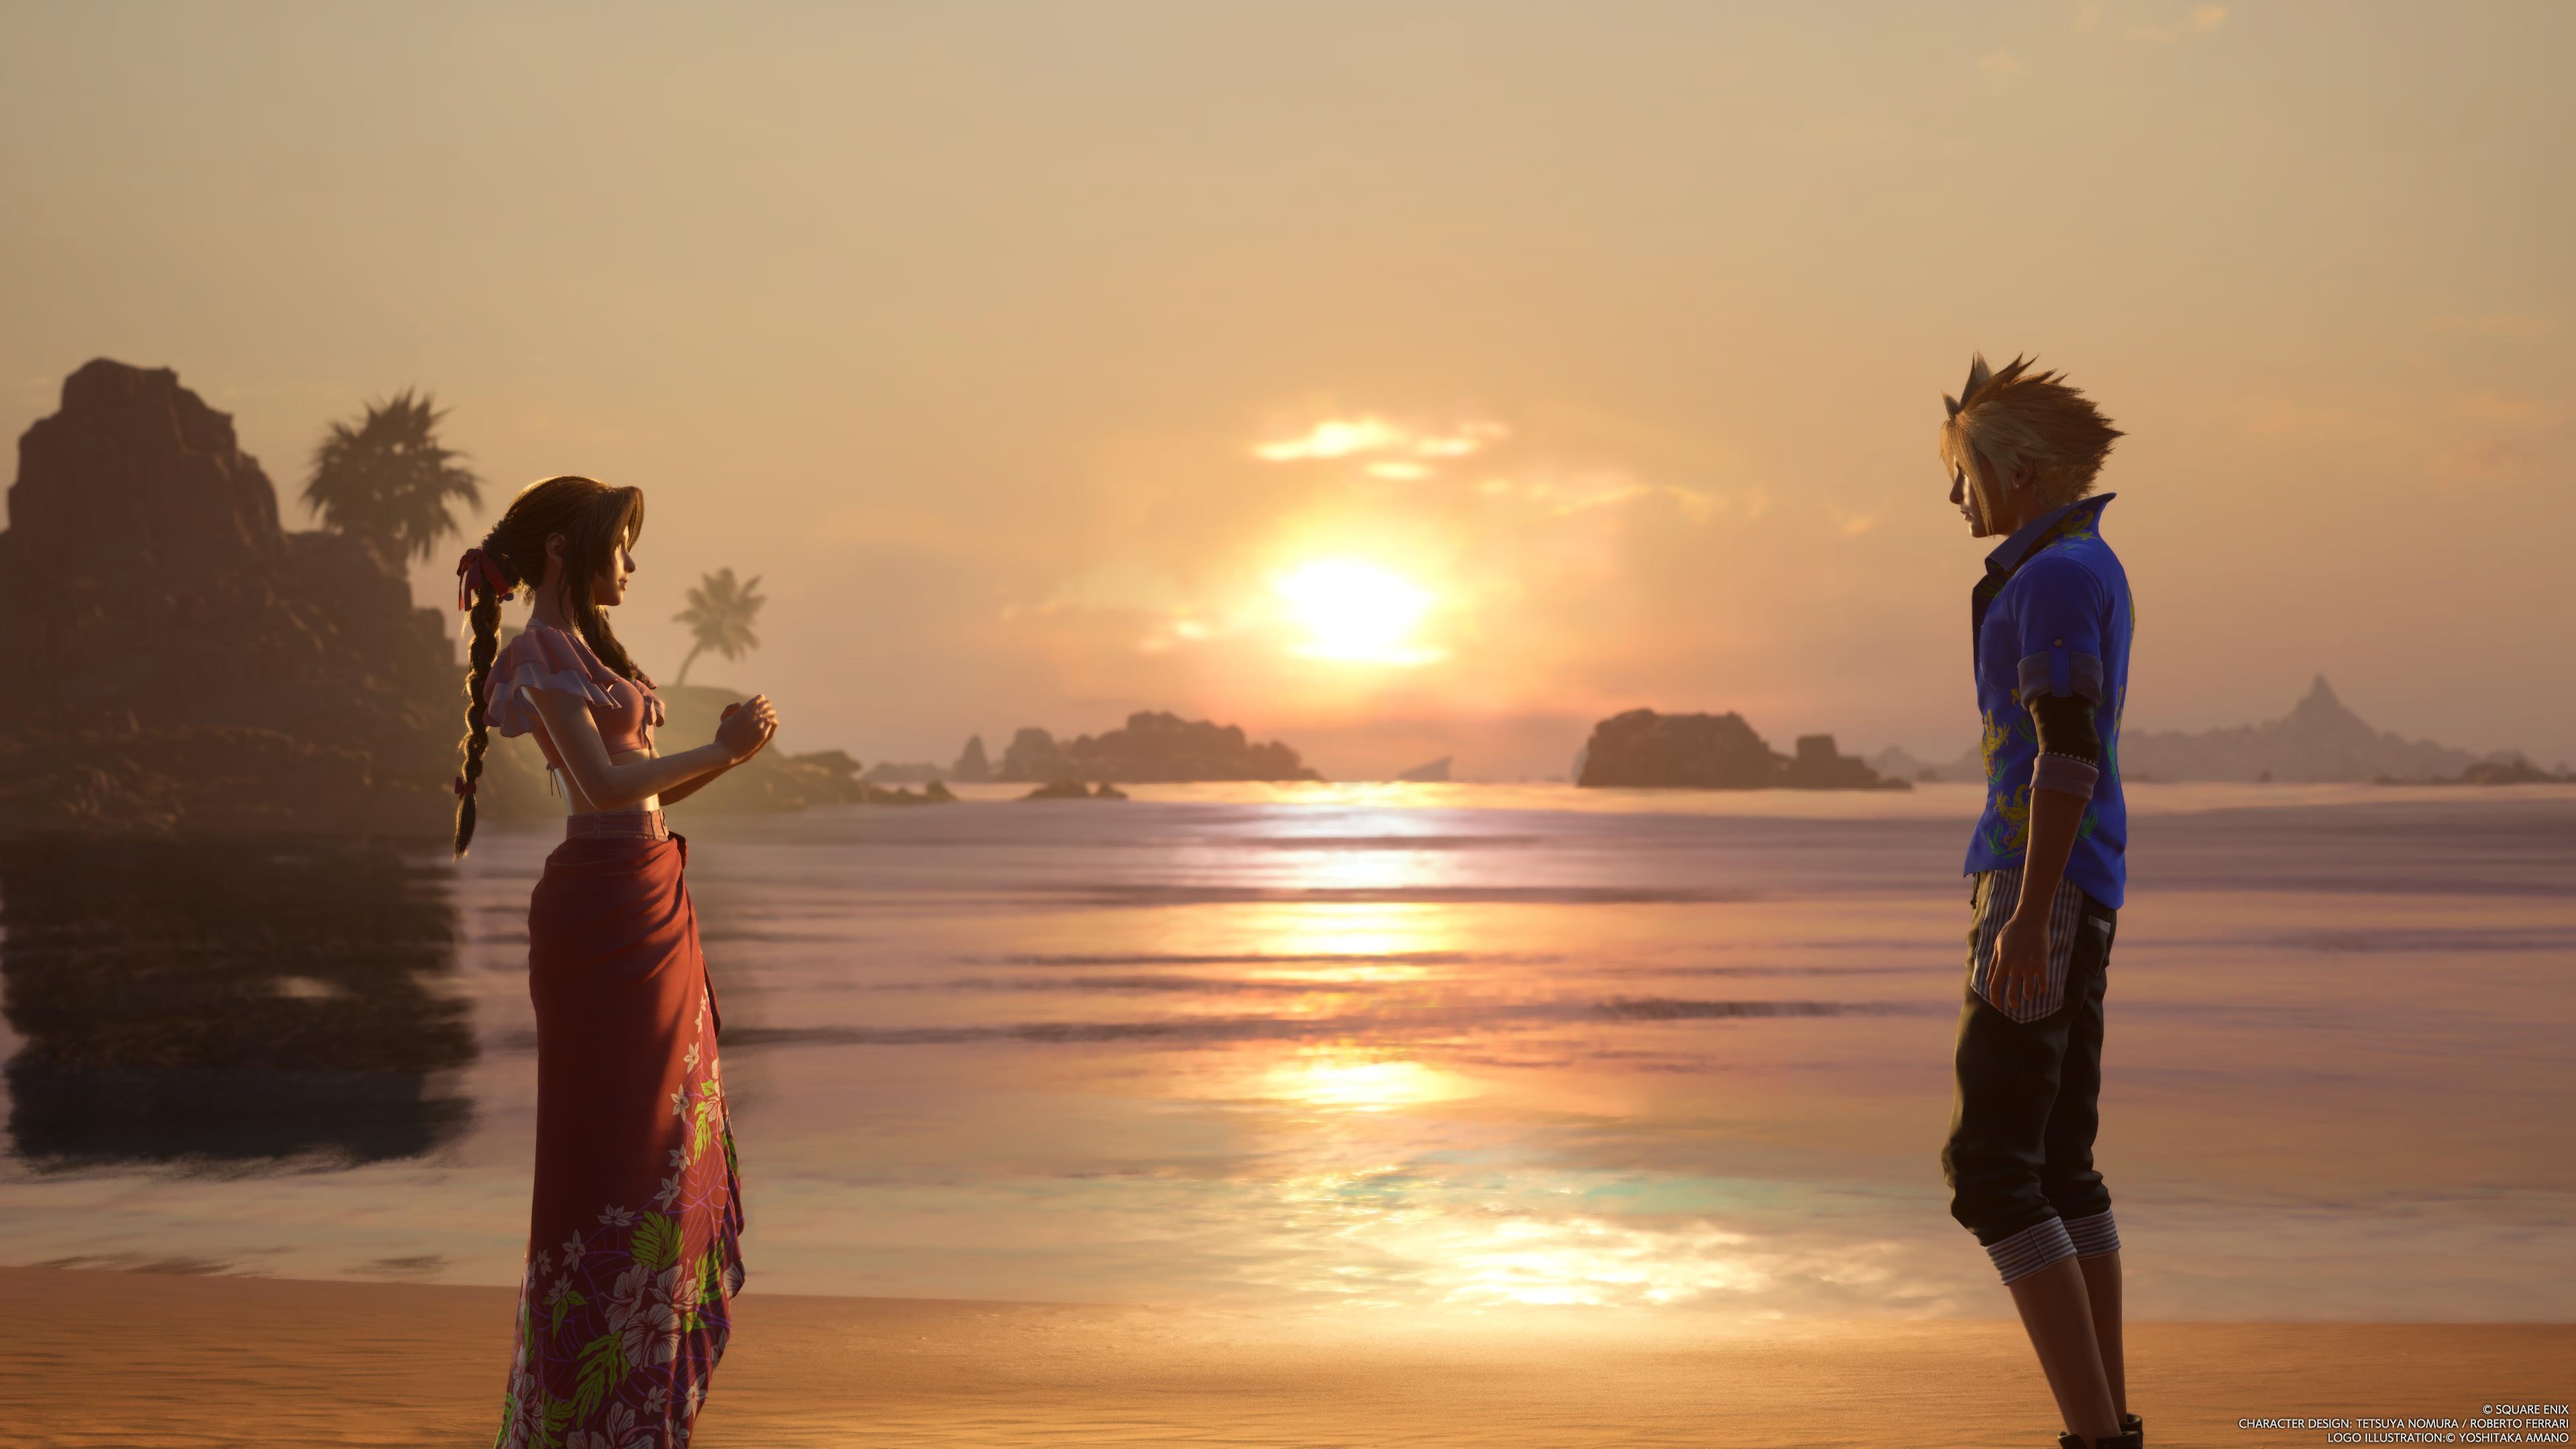 General 3840x2160 Final Fantasy VII: Rebirth Aerith Gainsborough Cloud Strife video games Square Enix sunlight video game characters CGI video game girls standing video game boys Sun reflection water beach women on beach men on beach palm trees long hair watermarked side view video game art